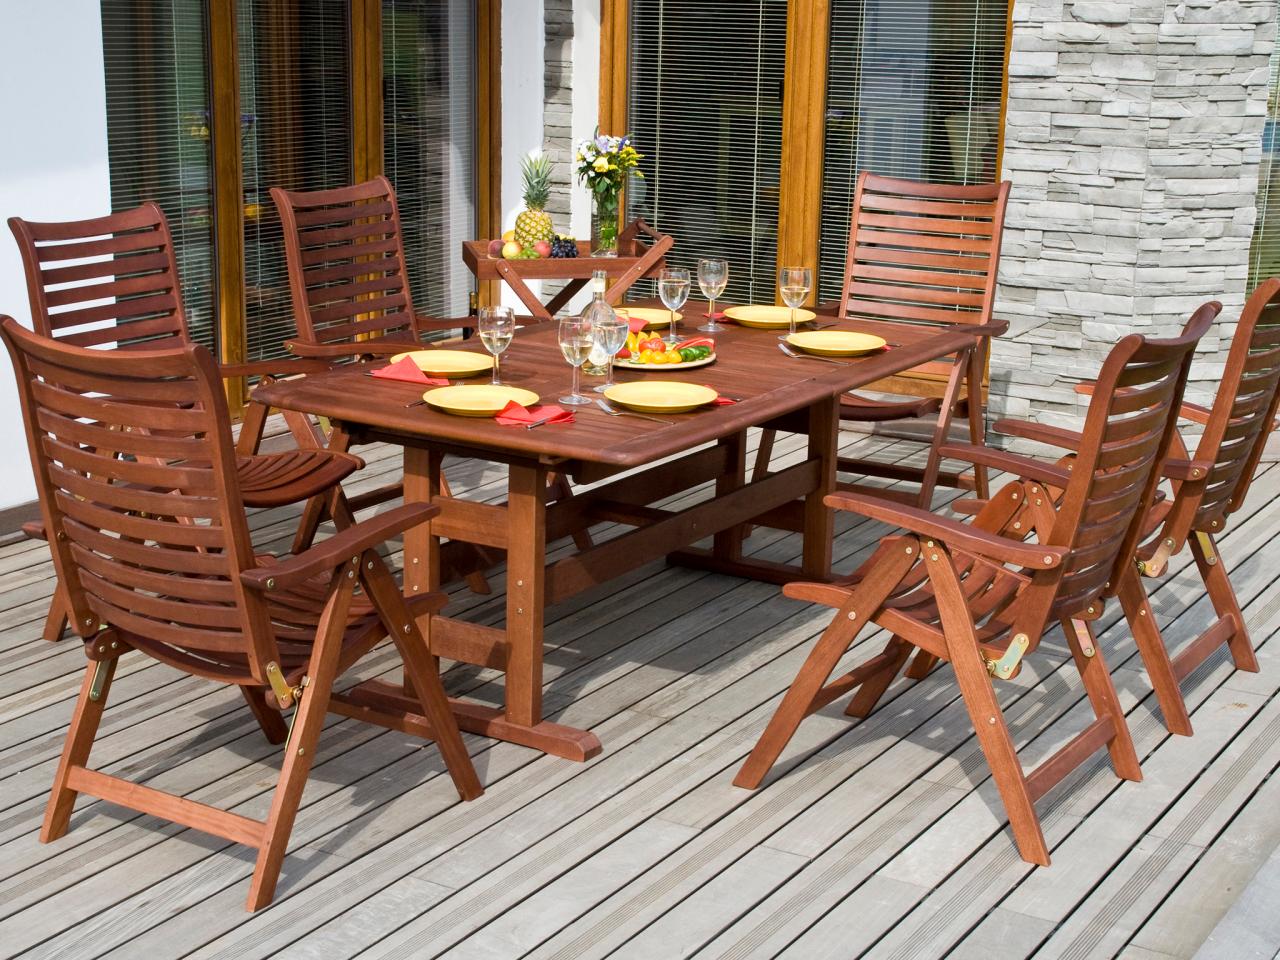 Refinishing Wooden Outdoor Furniture Diy, What Oil To Use On Outdoor Wood Furniture